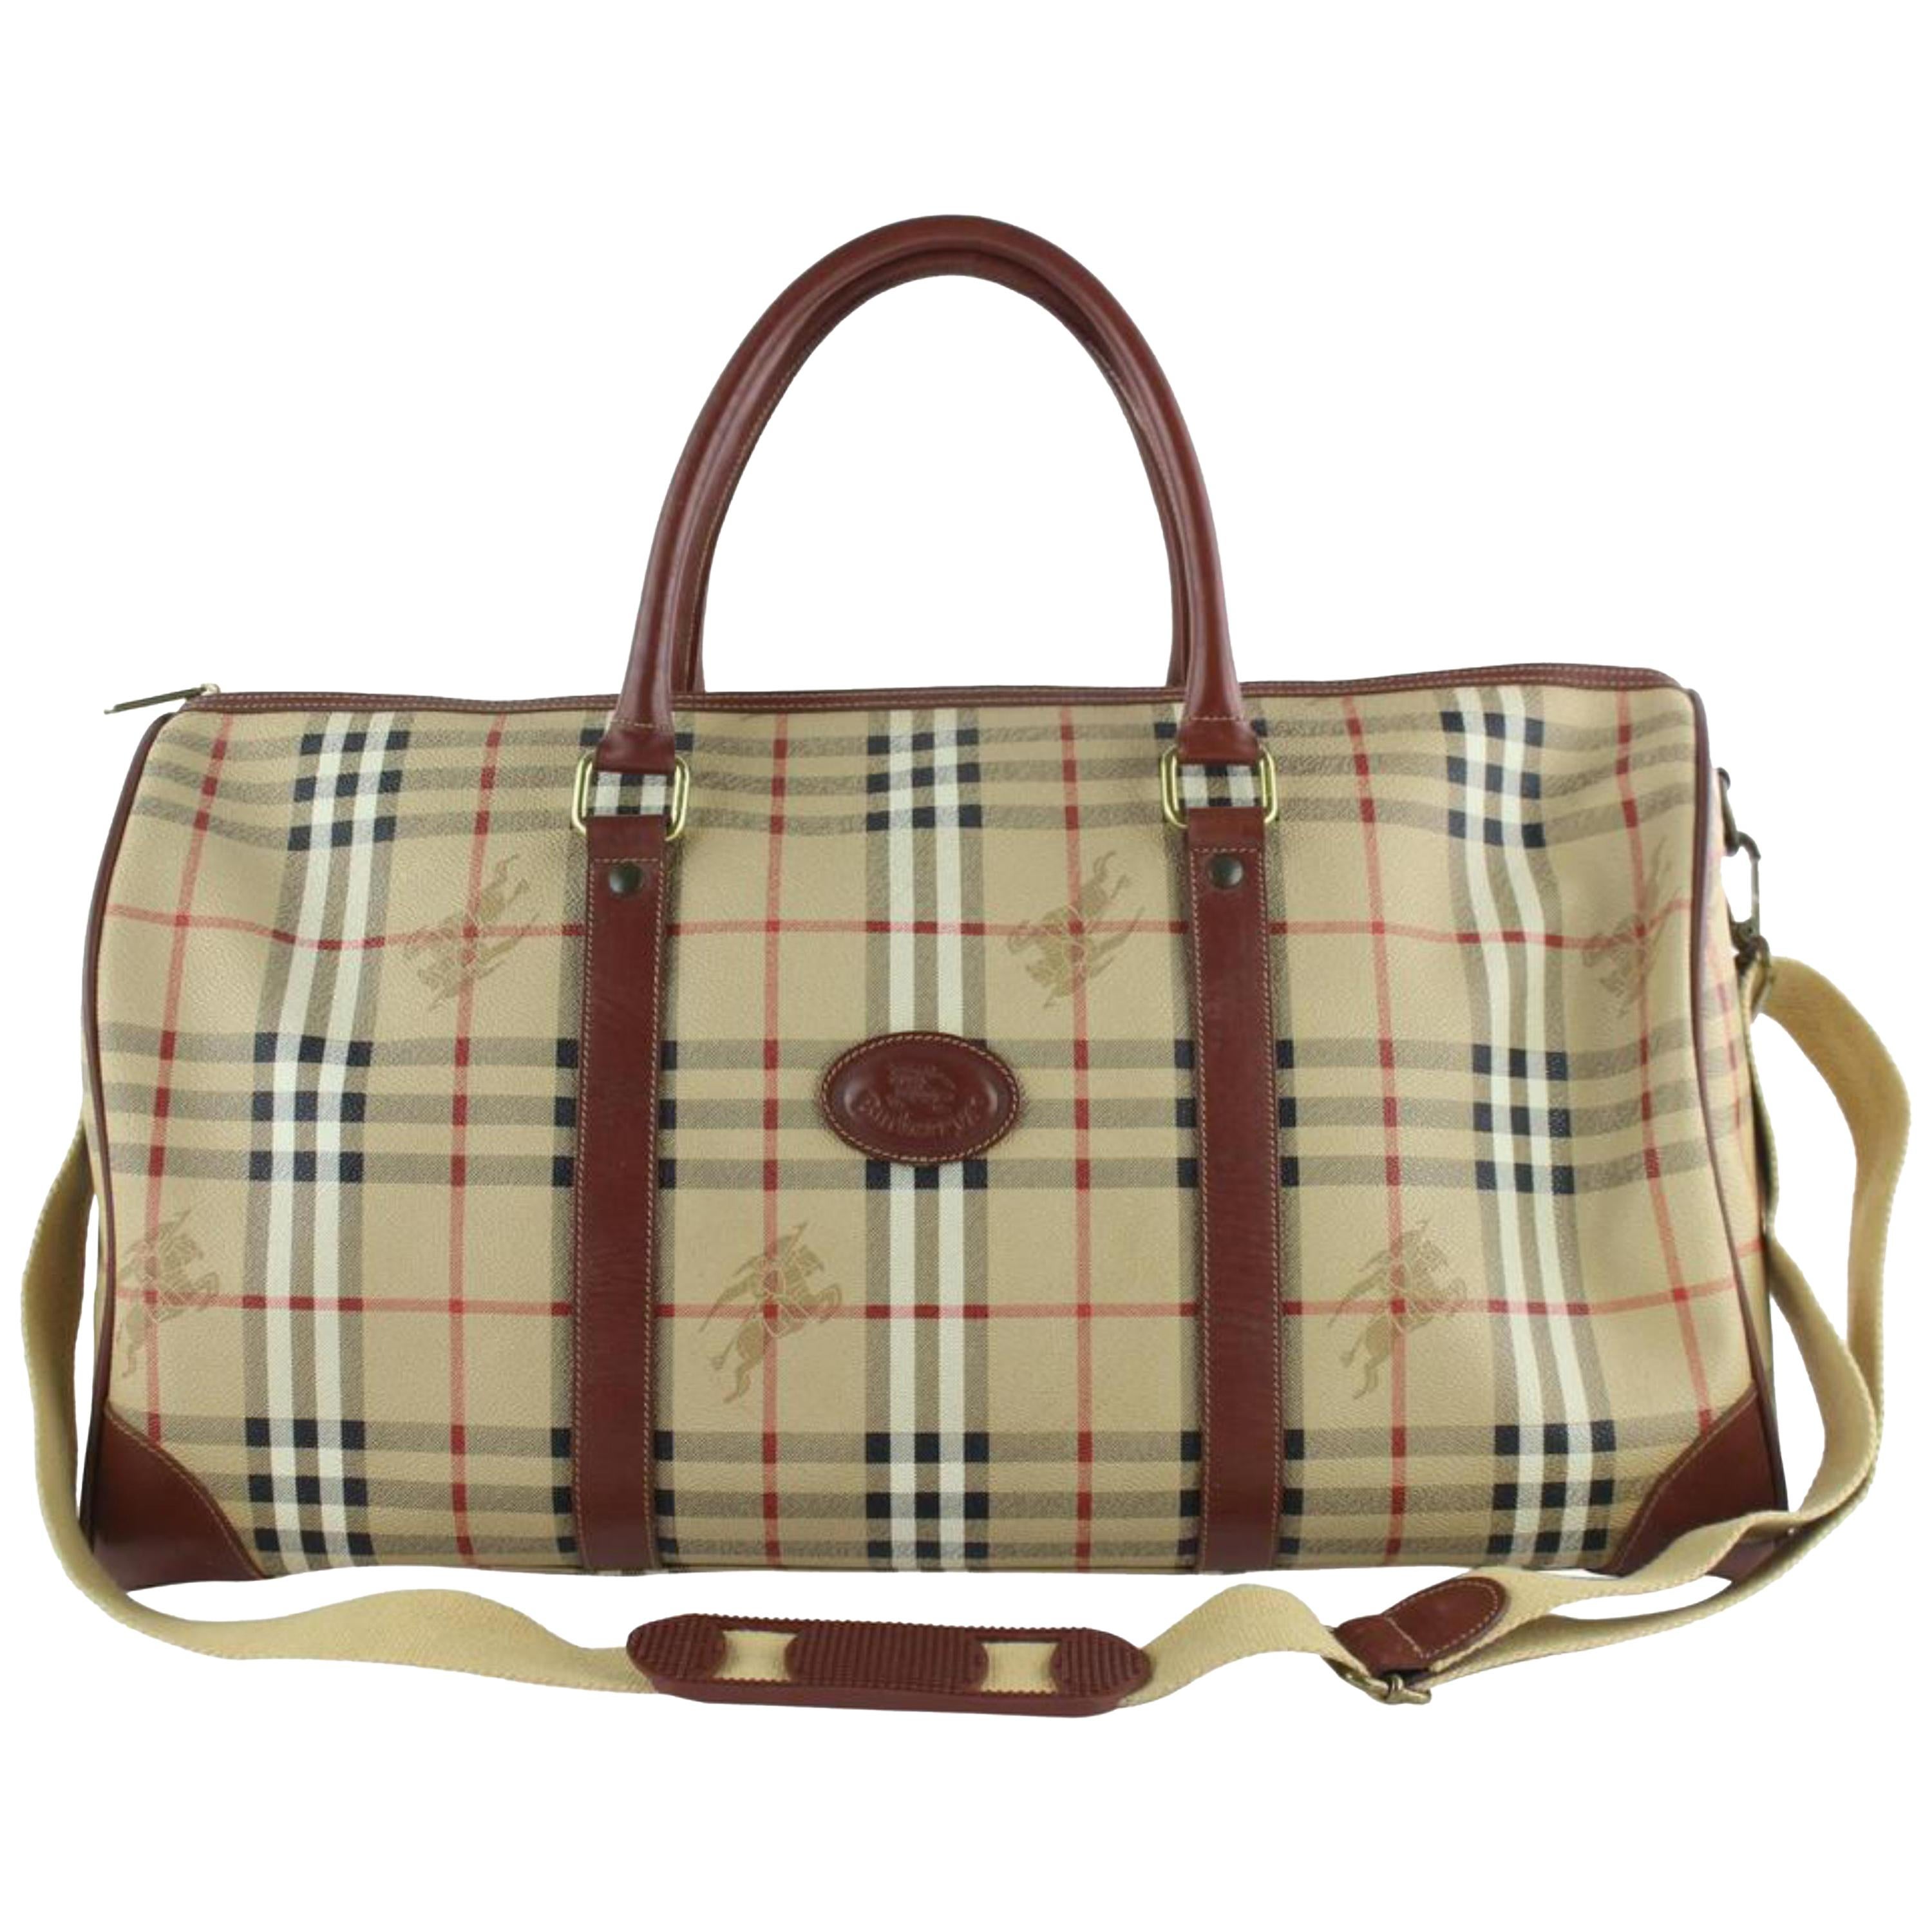 Burberry Duffle Nova Check Boston with 9burz1029 Brown Canvas Weekend/Travel Bag For Sale